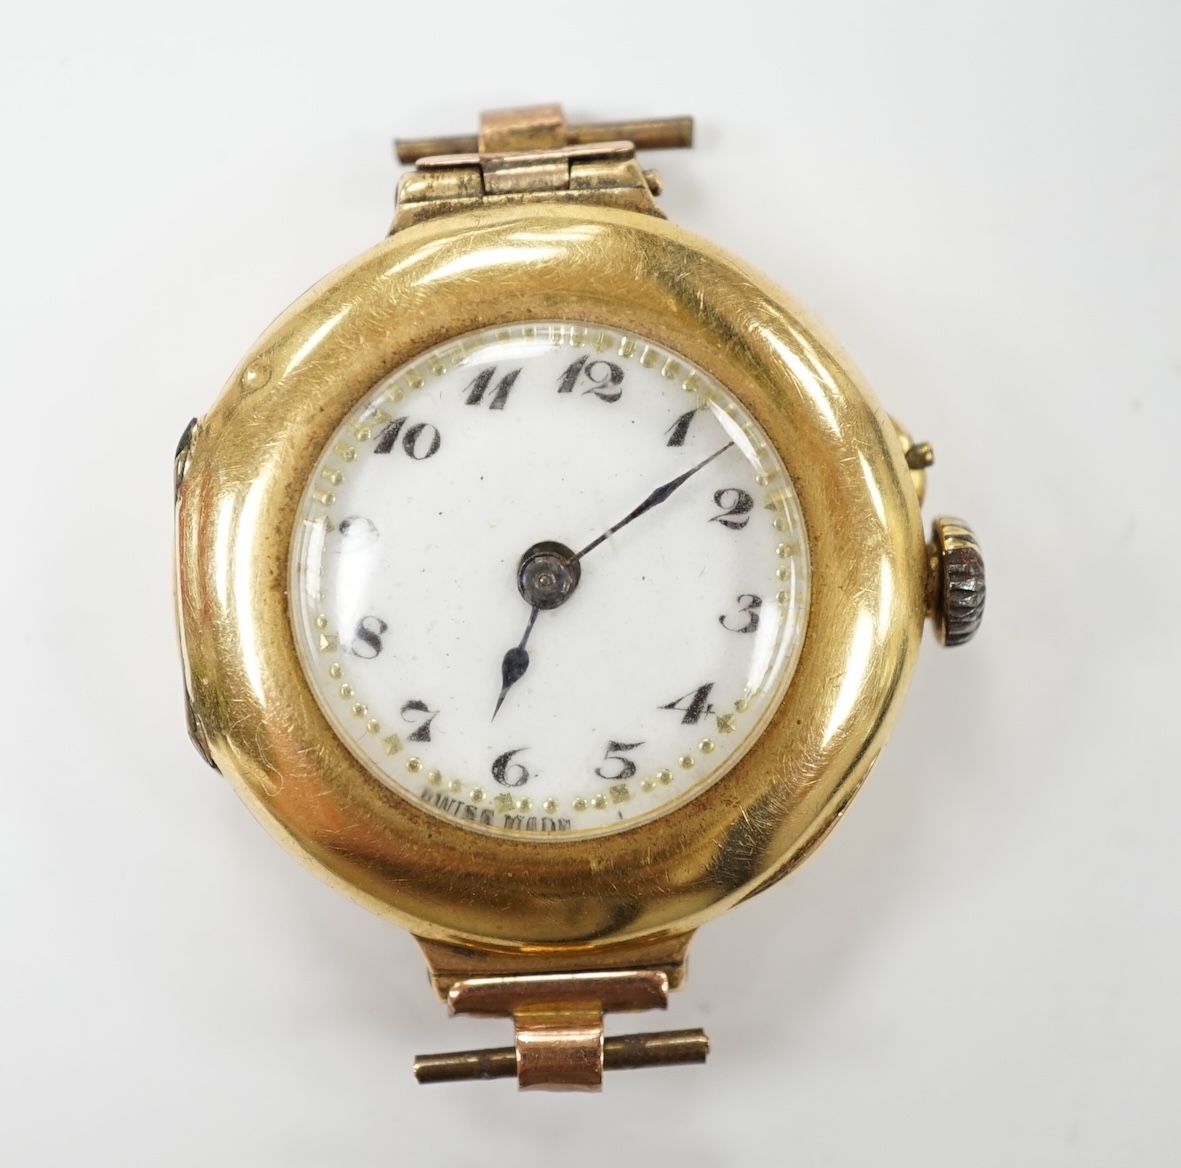 A lady's 18k manual wind wrist watch, with Arabic dial, no strap, gross weight 17.1 grams, Condition - poor